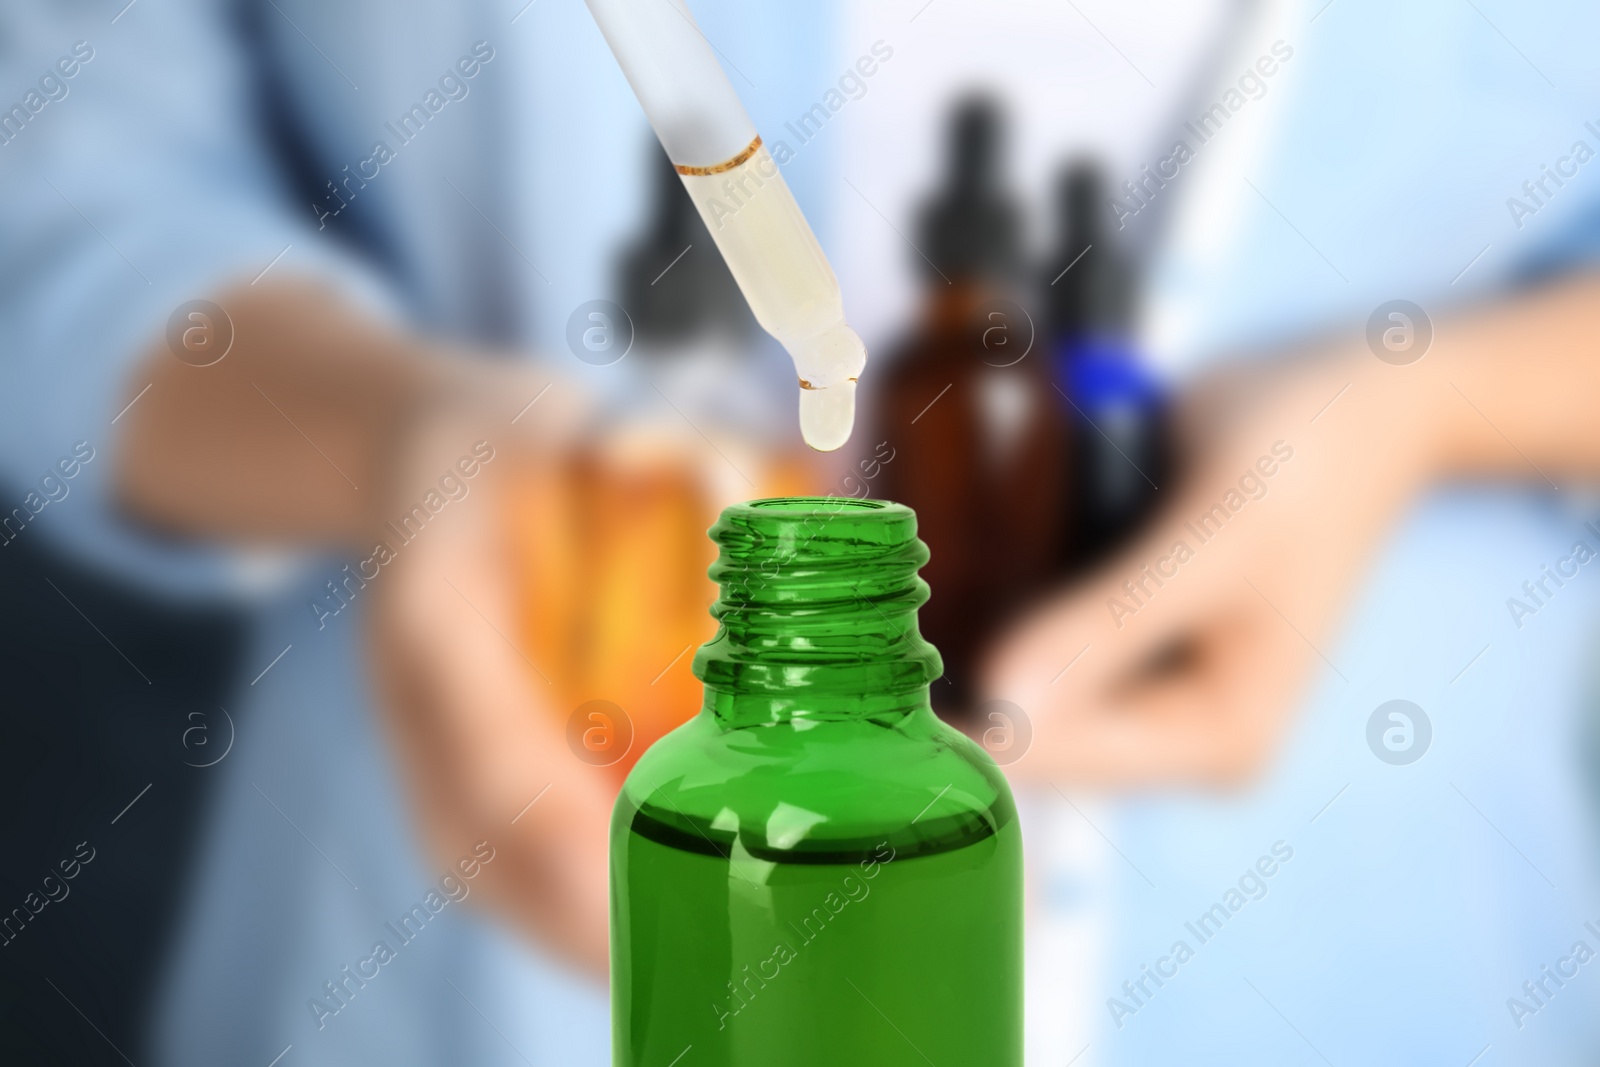 Image of Little bottle with essential oil and dropper against blurred background